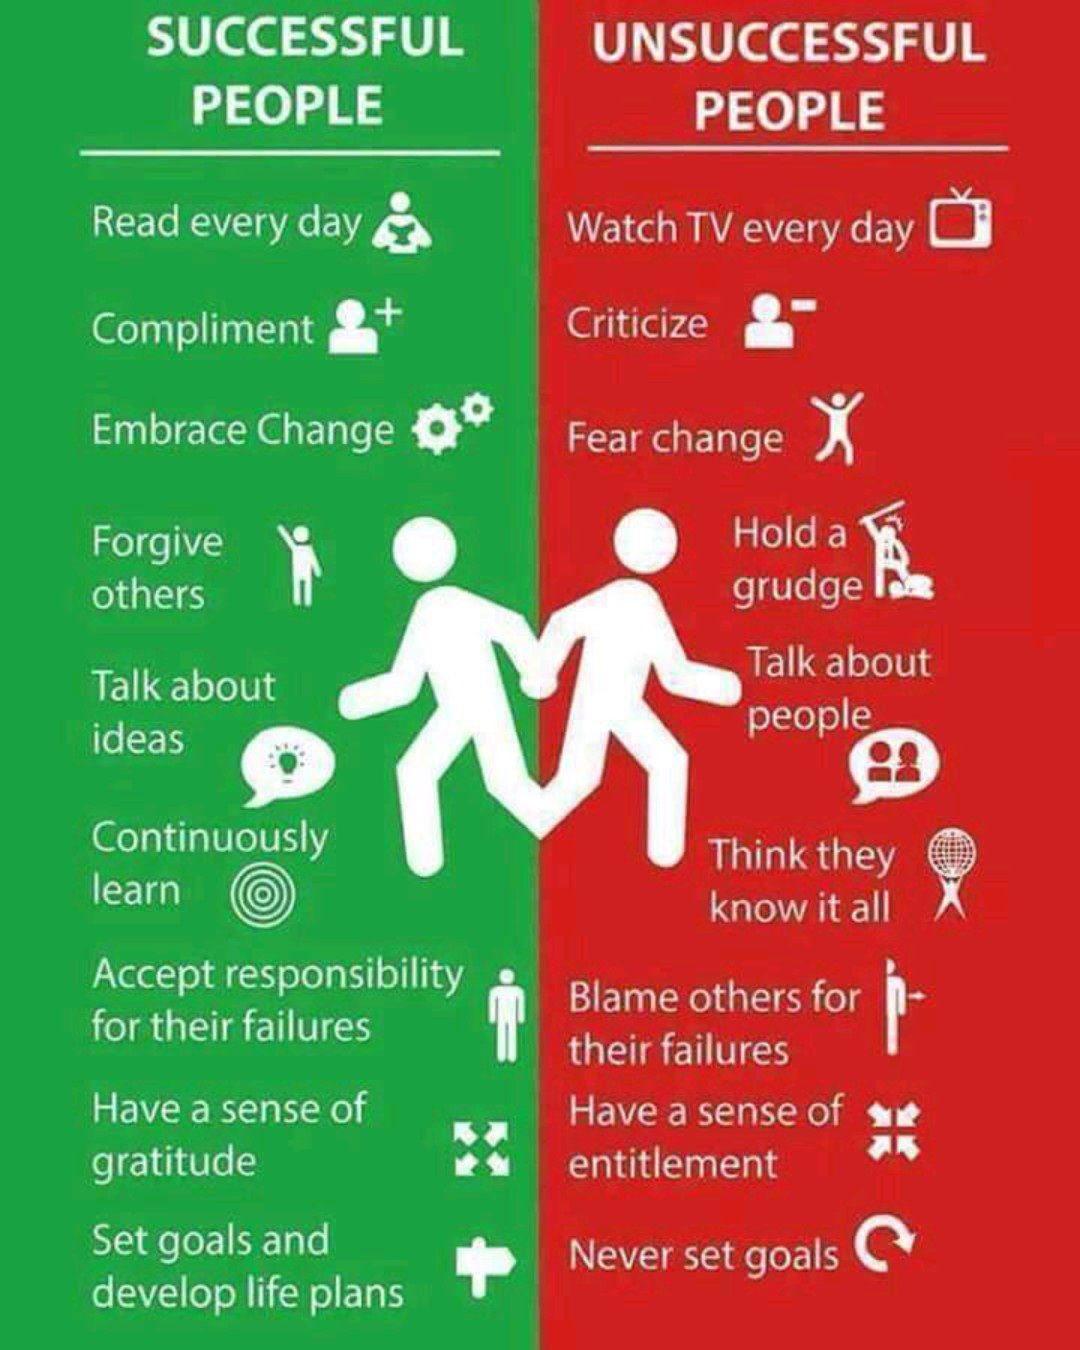 SUCCESSFUL UNSUCCESSFUL

PEOPLE PEOPLE
ACERT CE) PS Watch TV every day 3
Compliment at Criticize ga

[SplelEIdN@ Eel o° Fear change X

Forgive } » * 5h 4
others grudge

k
Talk about os a
[e[F1 [+ i es
Continuously sa
[ET know it all

Accept responsibility
for their failures [|

’

Blame others for I

their failures

Have a sense of Have a sense of «ae
; bod : FI

gratitude C2 LT Eat

Set goals and - Never set goals (&
develop life plans